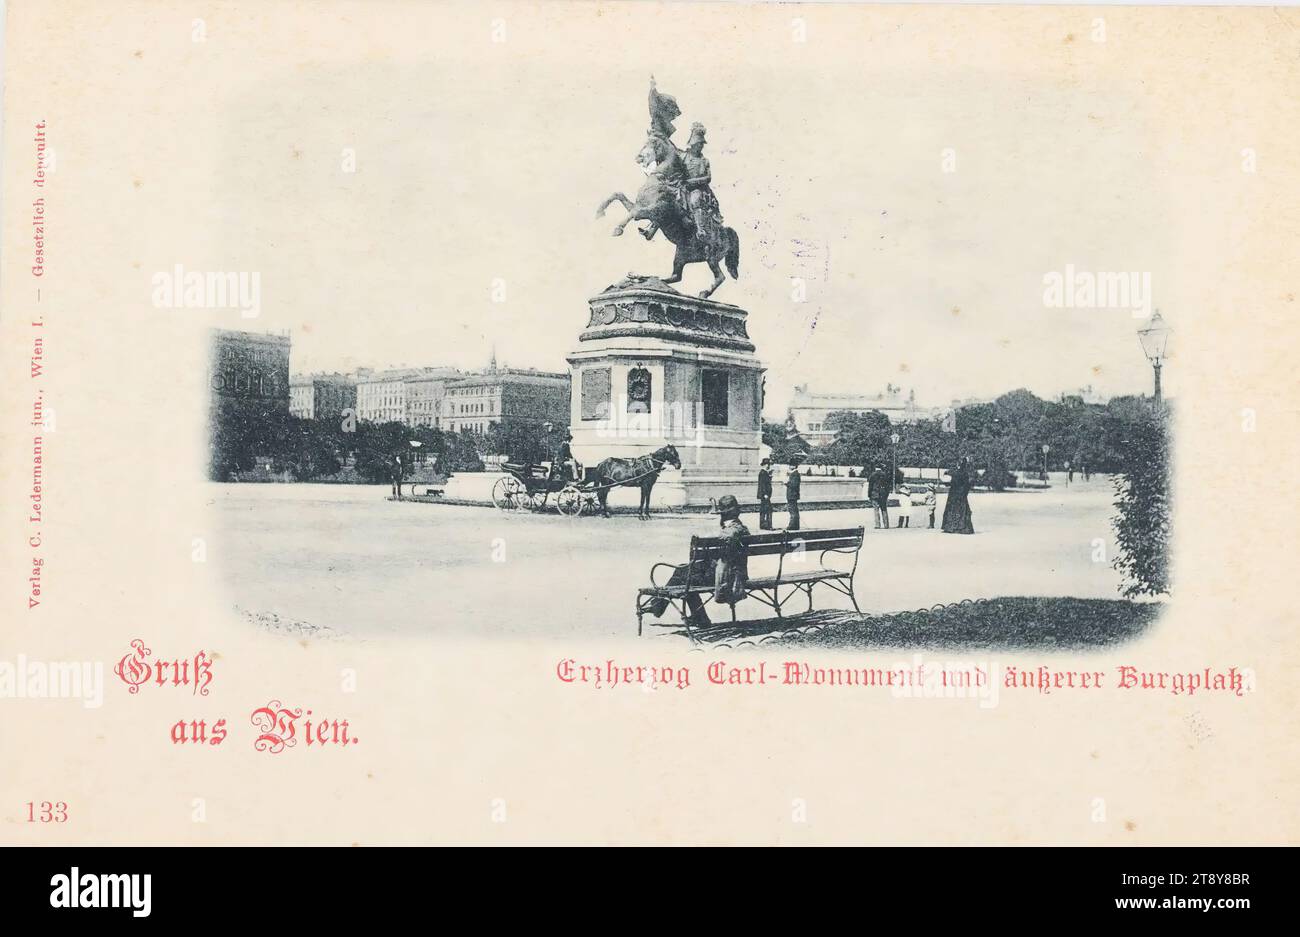 Greeting from Vienna. Archduke Carl monument and outer castle square, Carl (Karl) Ledermann Jr, maker, date around 1898, cardboard, collotype, Habsburg, 1st district: inner city, monument, statue, sculpture, square, place, circus, etc, with people, four-wheeled, animal-drawn vehicle, ex: Droschke, carriage, wagon, Heldenplatz, equestrian statue, Archduke Carl monument (1), The Vienna Collection Stock Photo